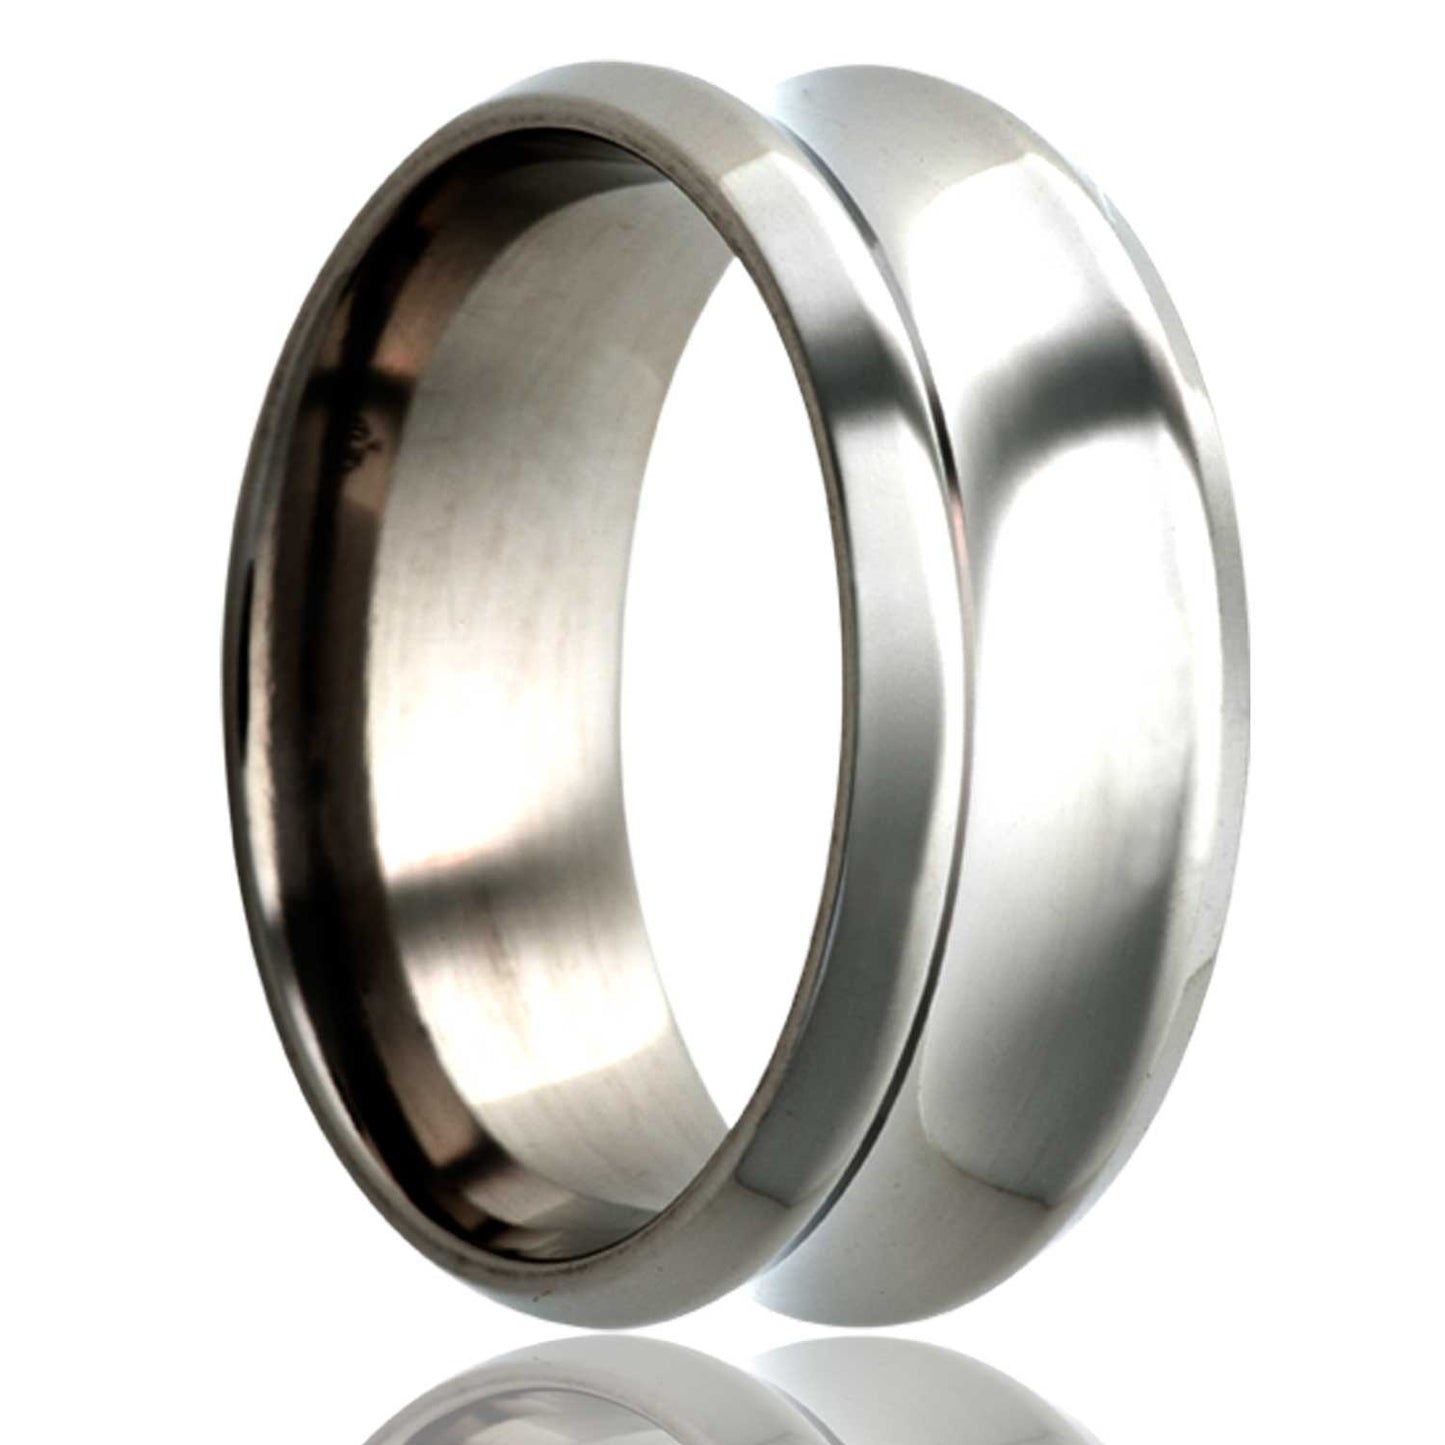 A concave titanium wedding band with beveled edges displayed on a neutral white background.